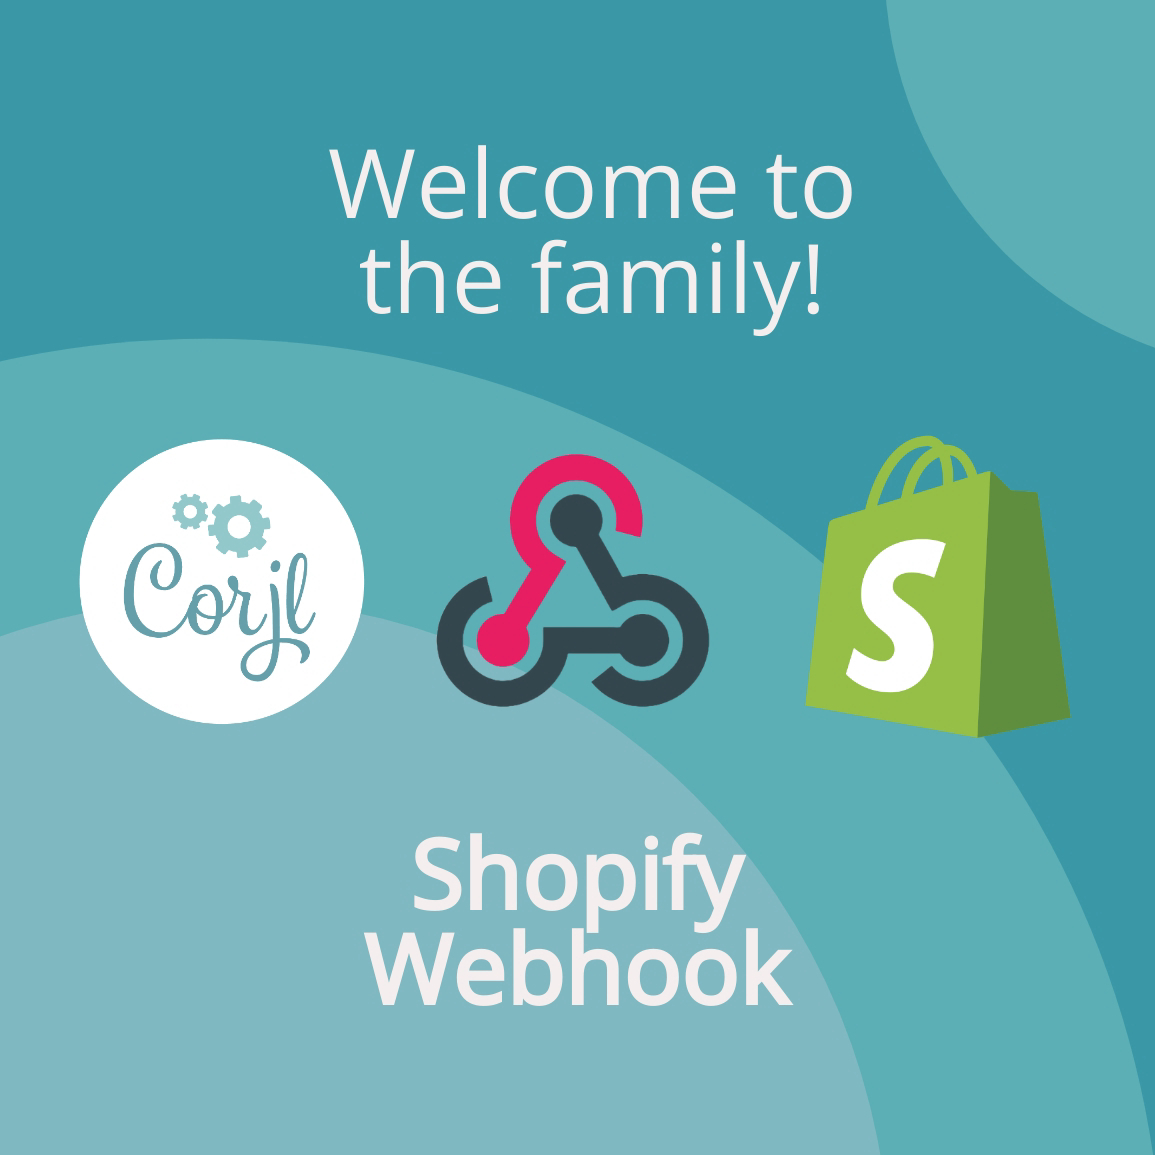 Welcome to the family! We now use Webhooks with Corjl Legacy! This will allow your Shopify orders to be created for your customers. For more information and instructions on the Shopify Web-hook - be sure to read our Knowledge Base on how this works! 🛍️